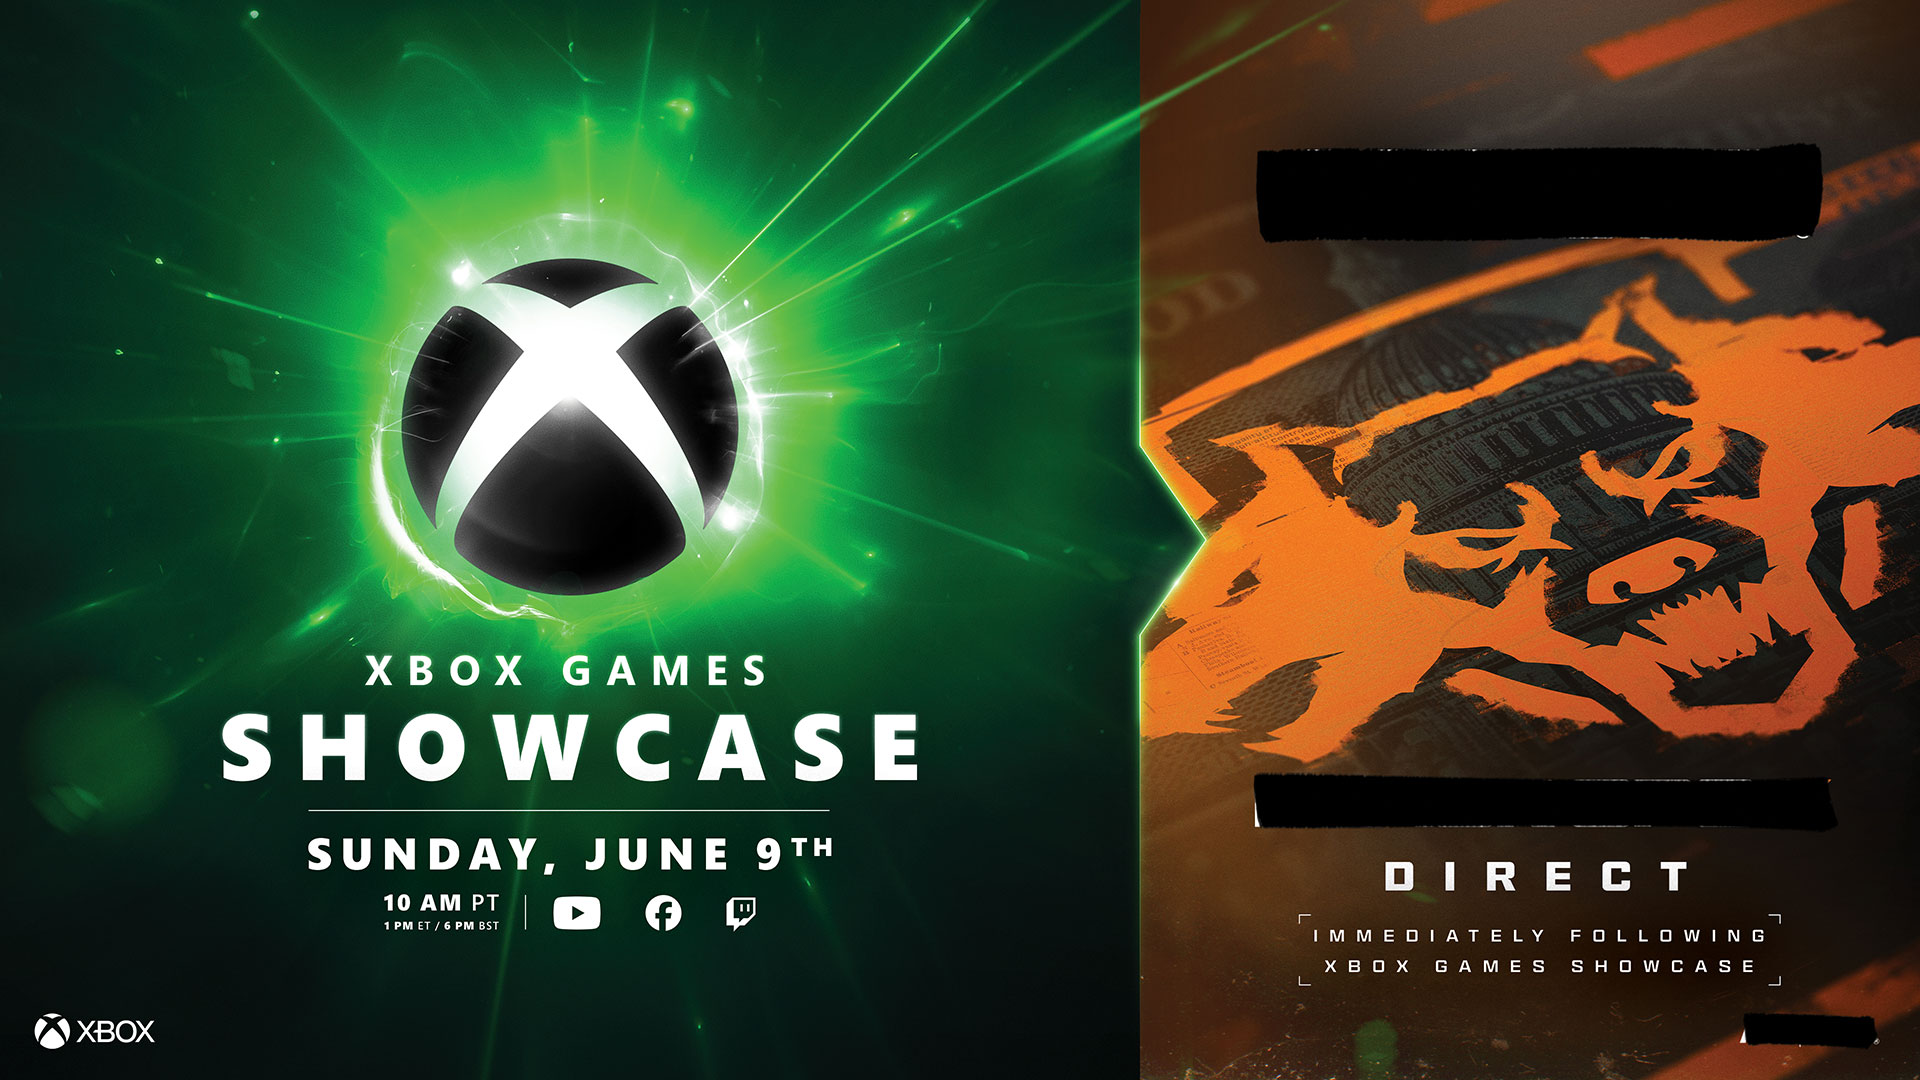 Major Xbox Games Showcase Set for June 9, Comes with 'Redacted Direct' Event 26